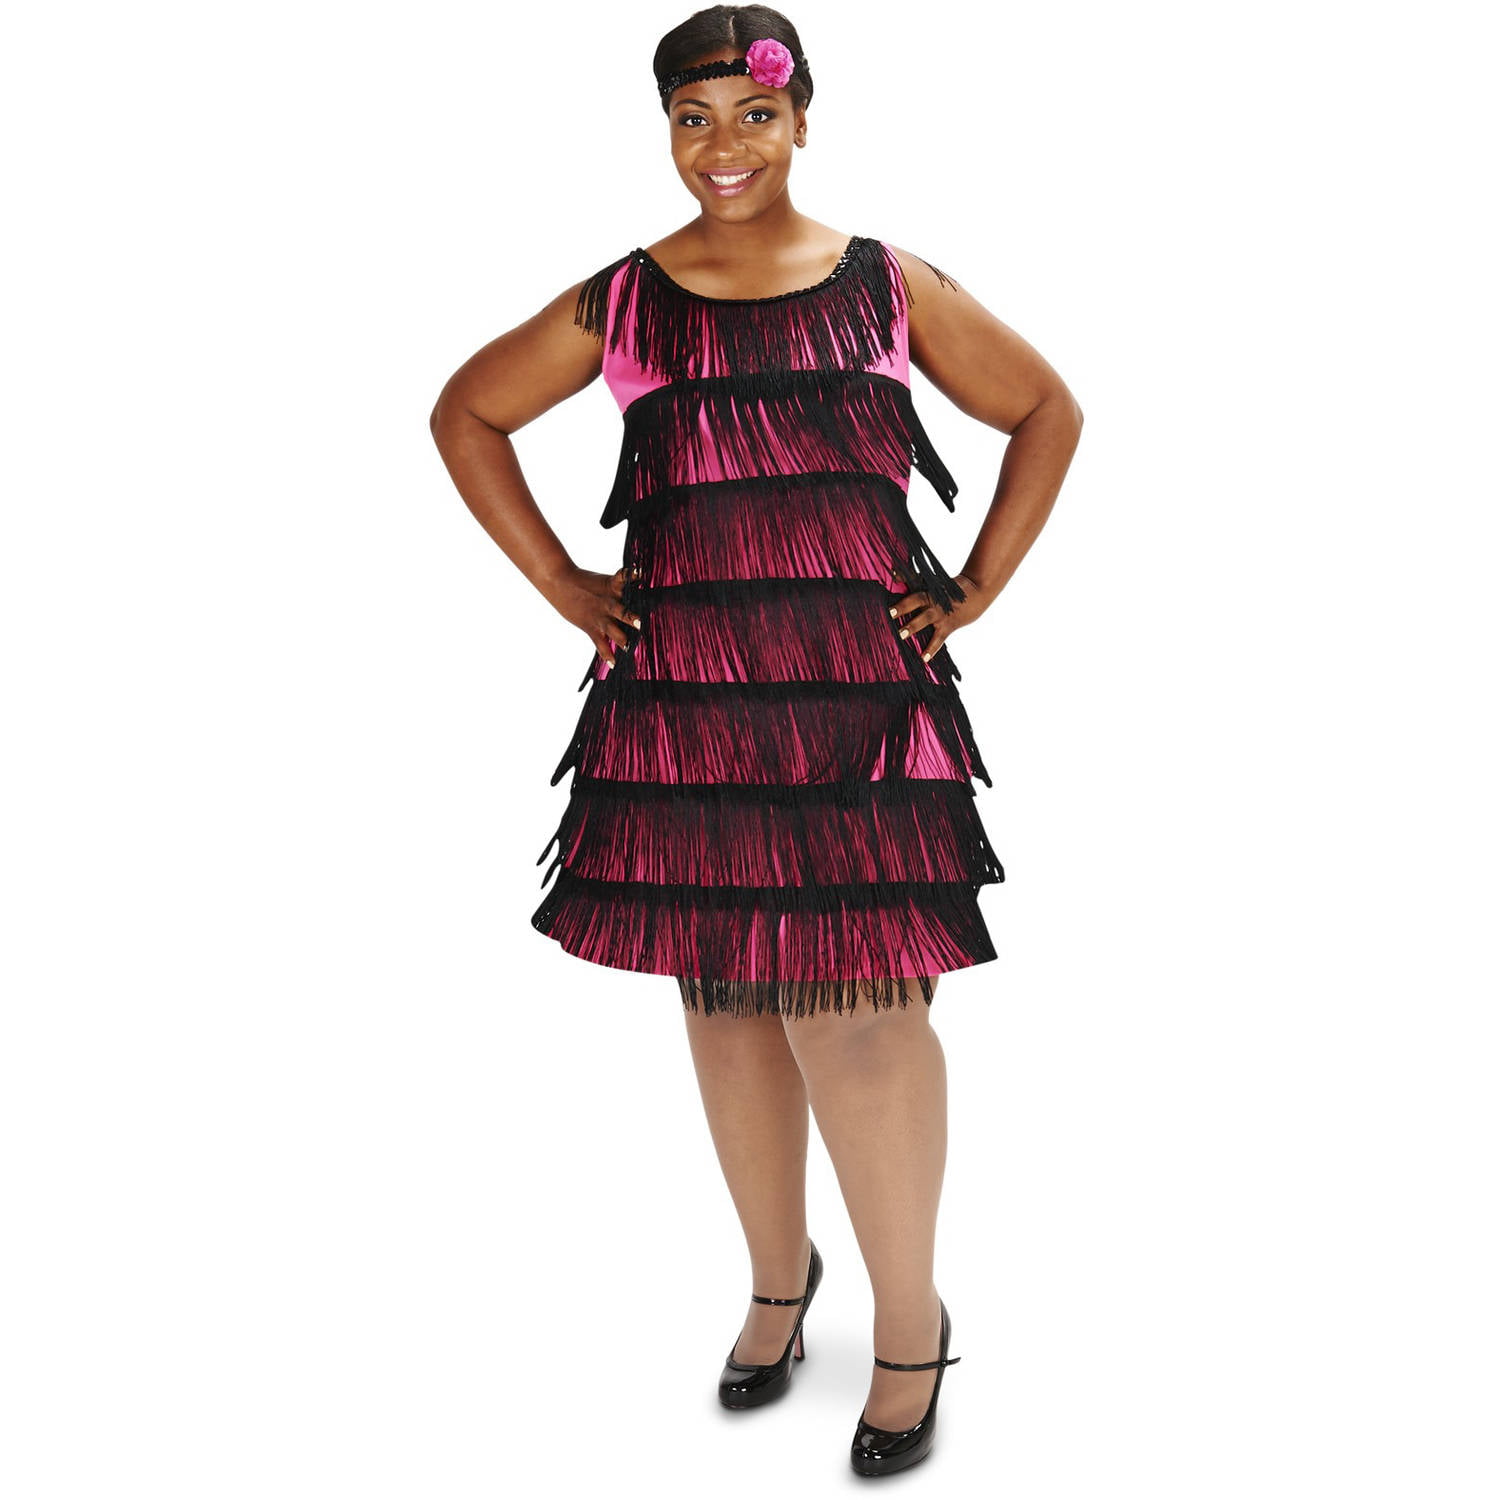 Women's 20's Shimmery Black Flapper Costume - Candy Apple Costumes